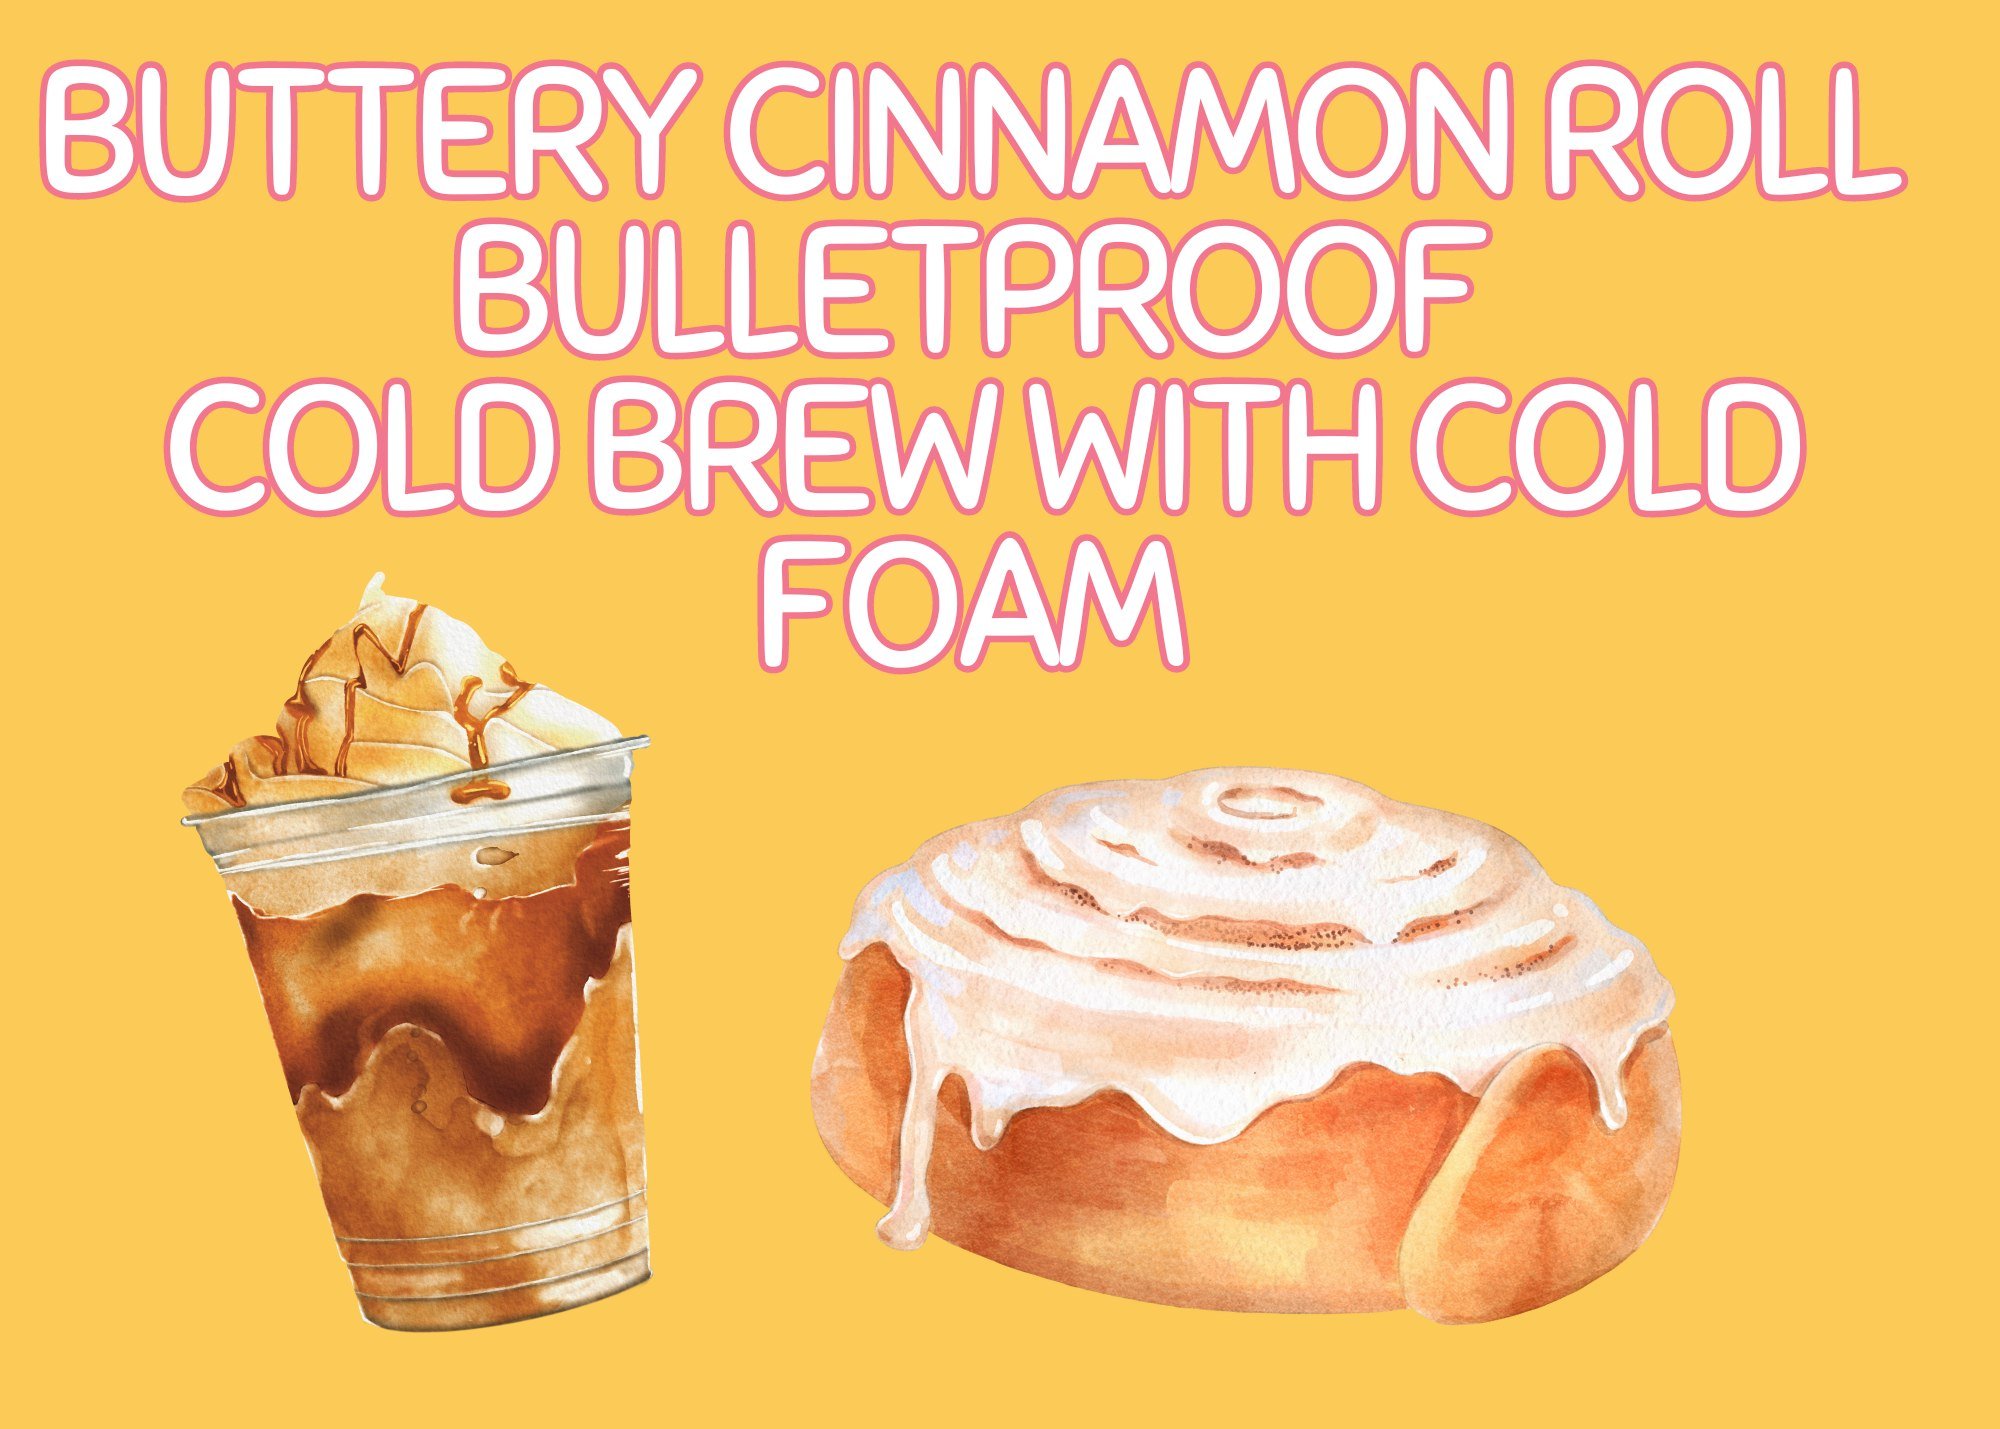 ☕🥳 MAY DRINK OF THE MONTH 🥳☕

The Buttery Cinnamon Roll Bulletproof Cold Brew with Cold Foam 😋

You're not going to want to miss this one! Buttery goodness! 🧡

✨You do not need a reservation or a child to patron the cafe and retail areas! Stop in